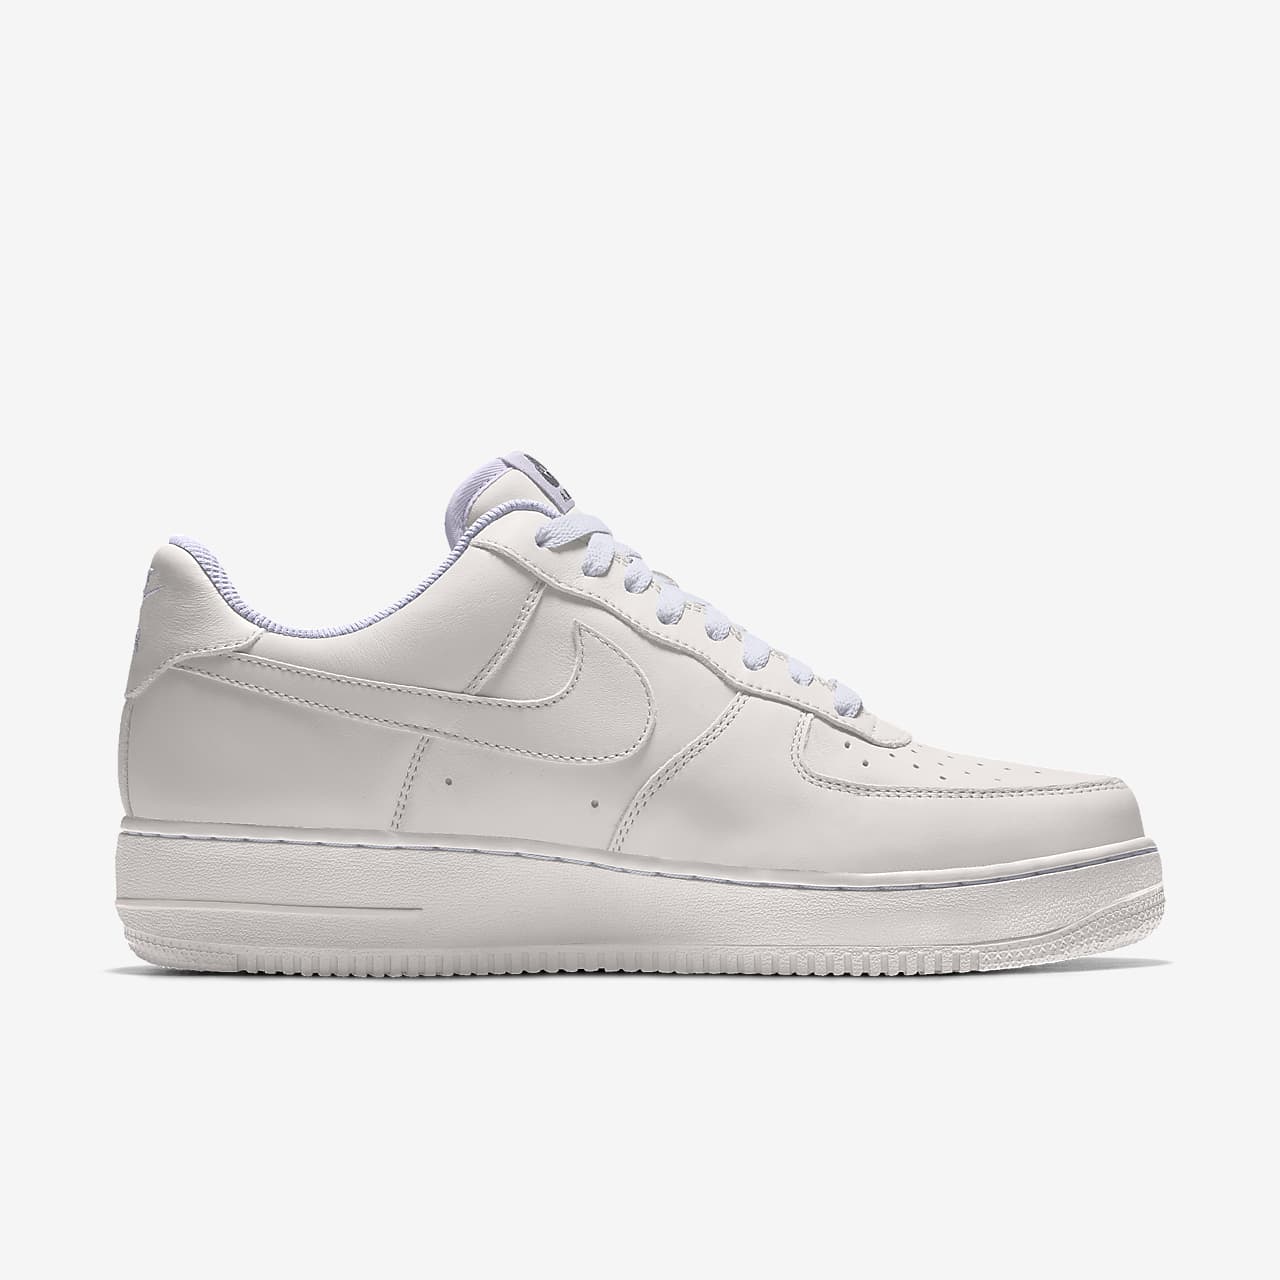 ripple leather air force 1